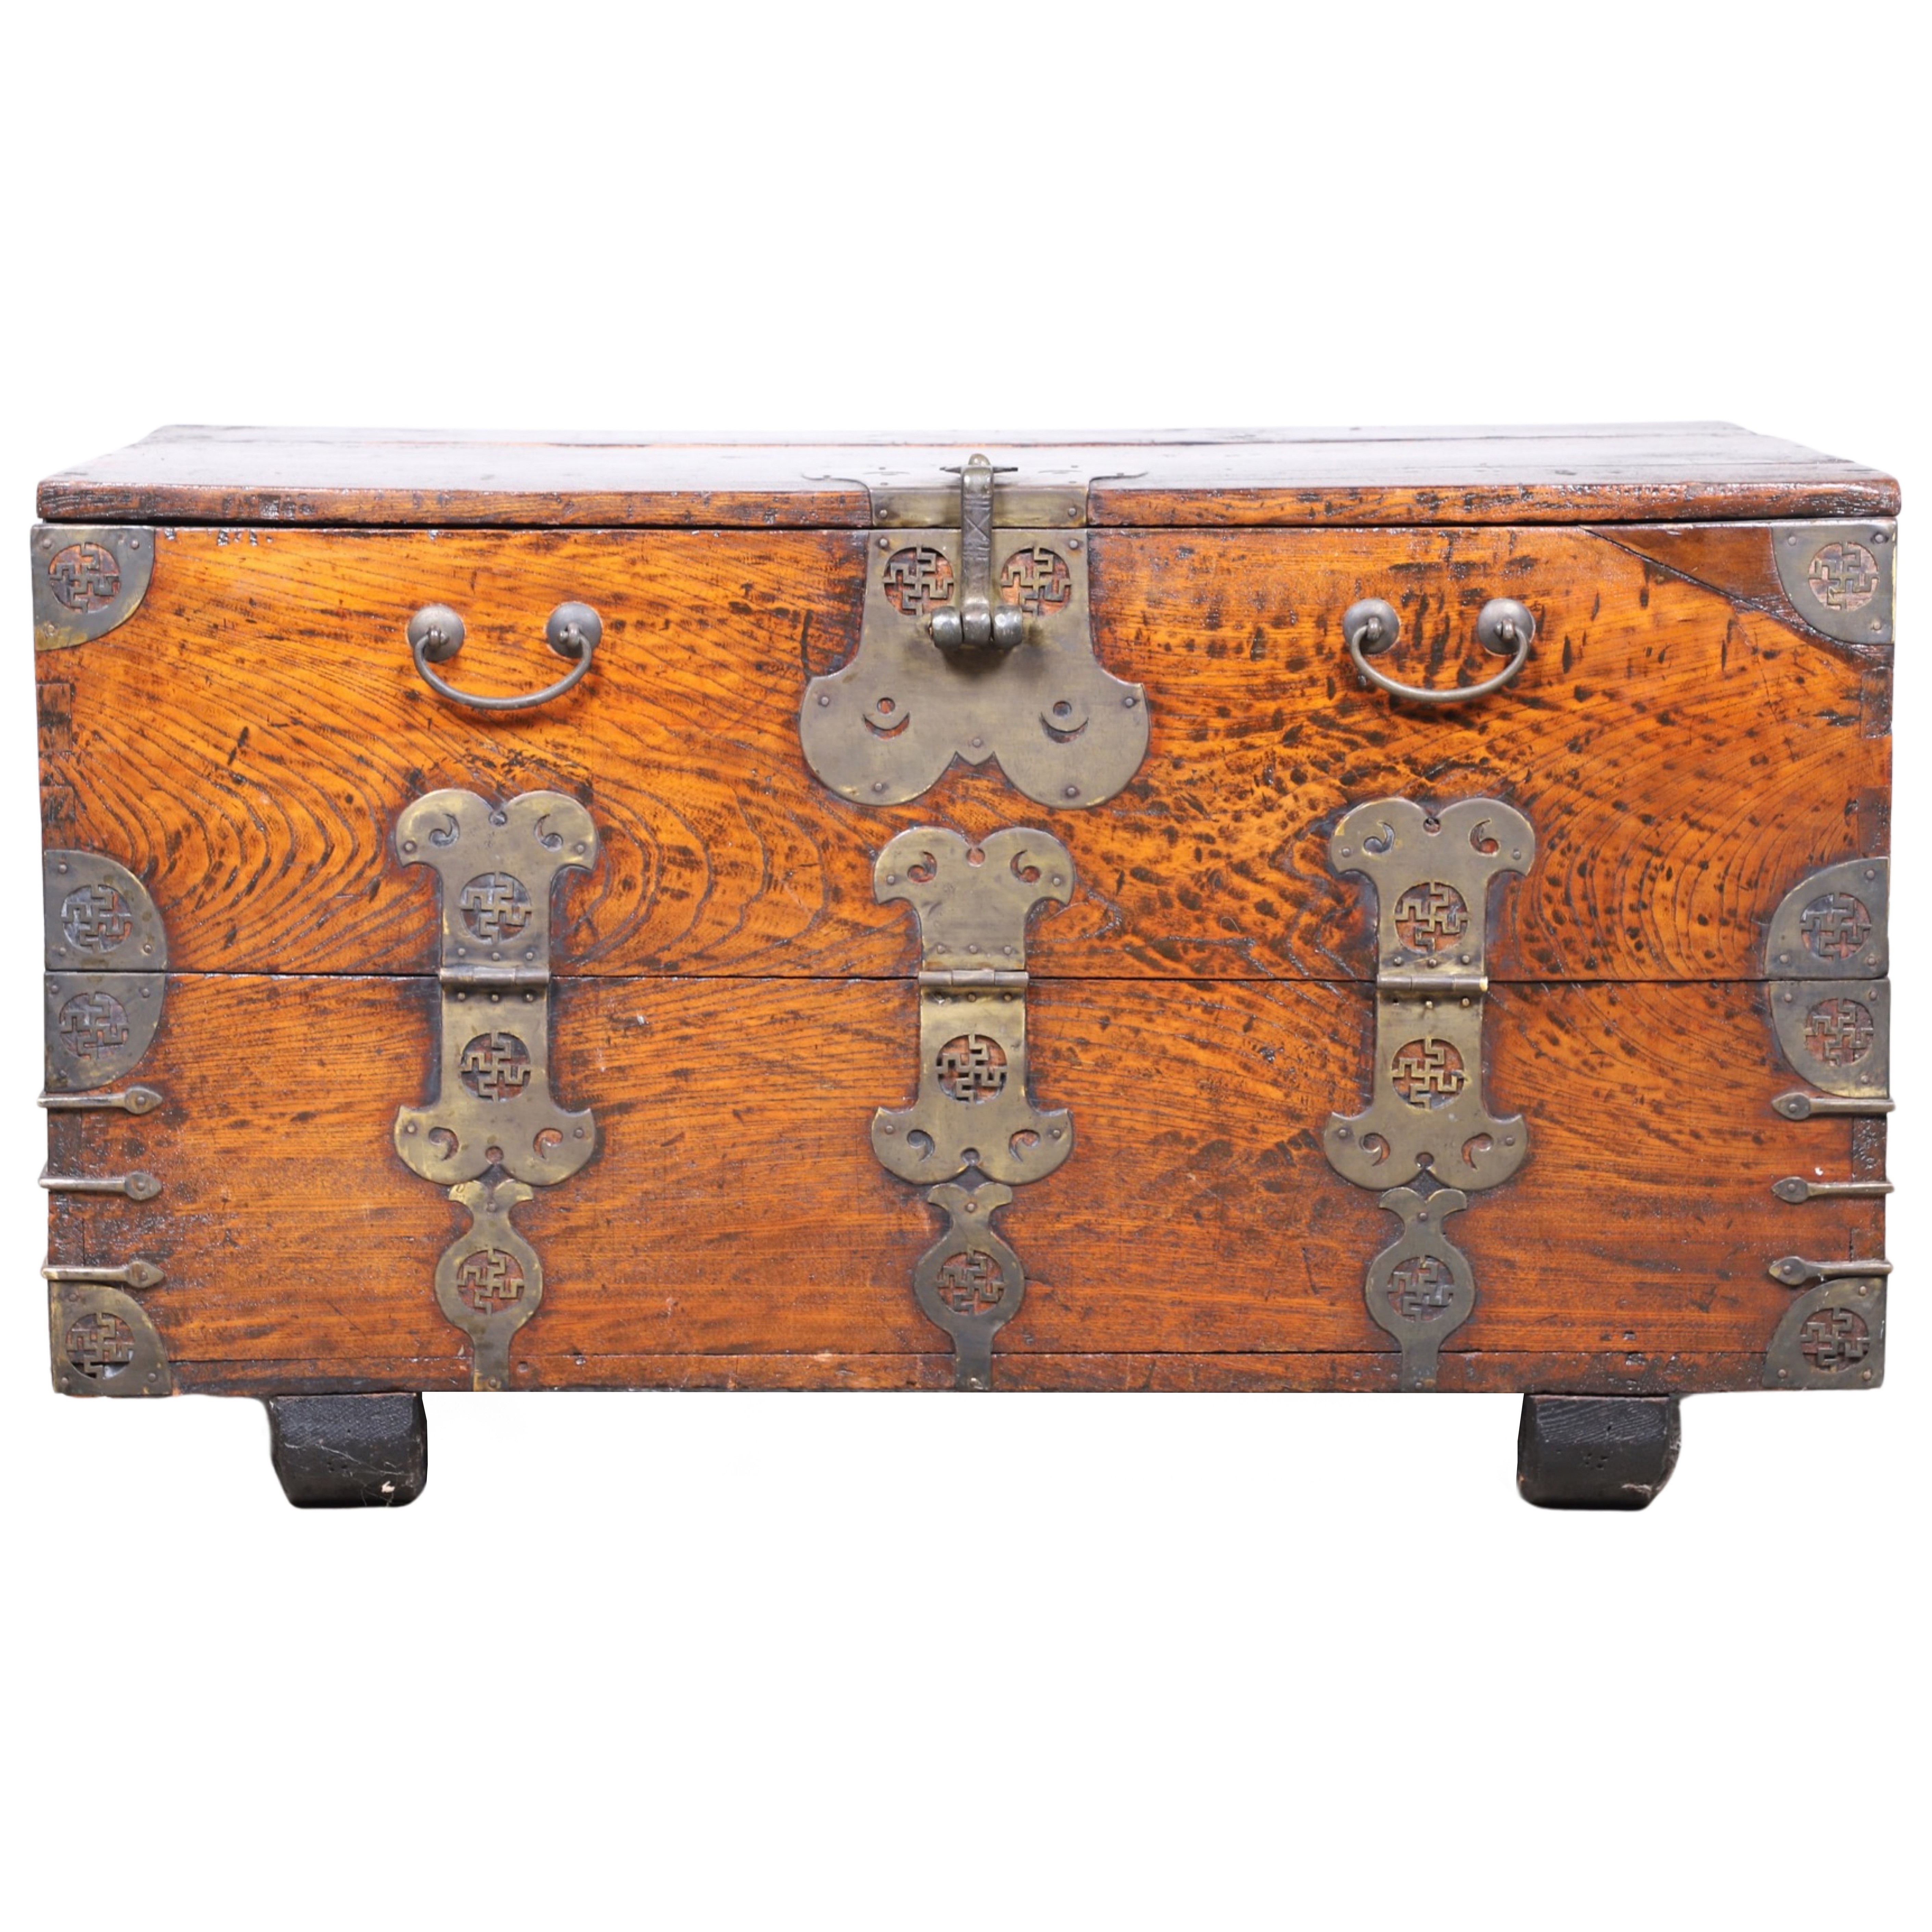 Chinese Elmwood trunk brass embossed 27a356